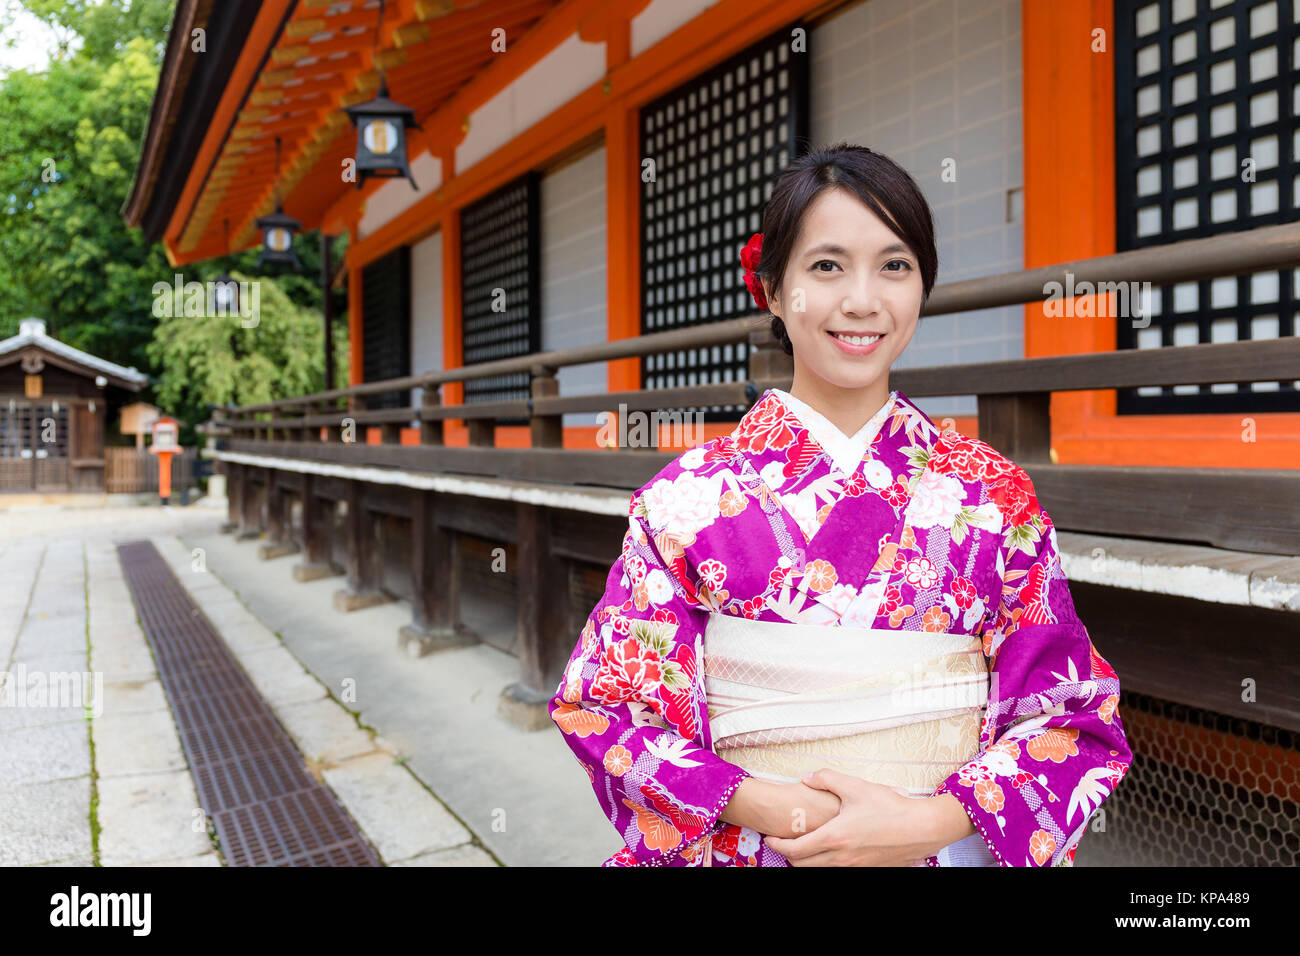 Japanese Woman with kimono dress at traditional temple Stock Photo - Alamy